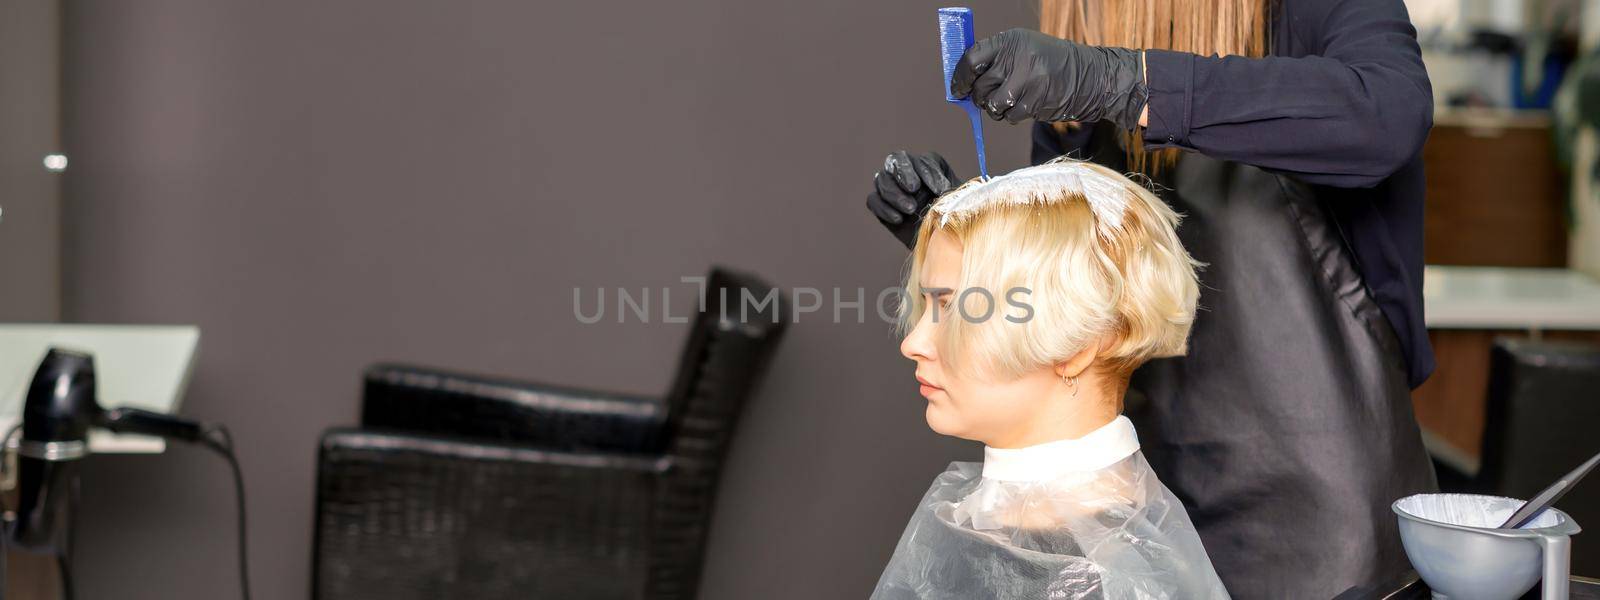 The professional hairdresser is dyeing the hair of her female client in a beauty salon. by okskukuruza